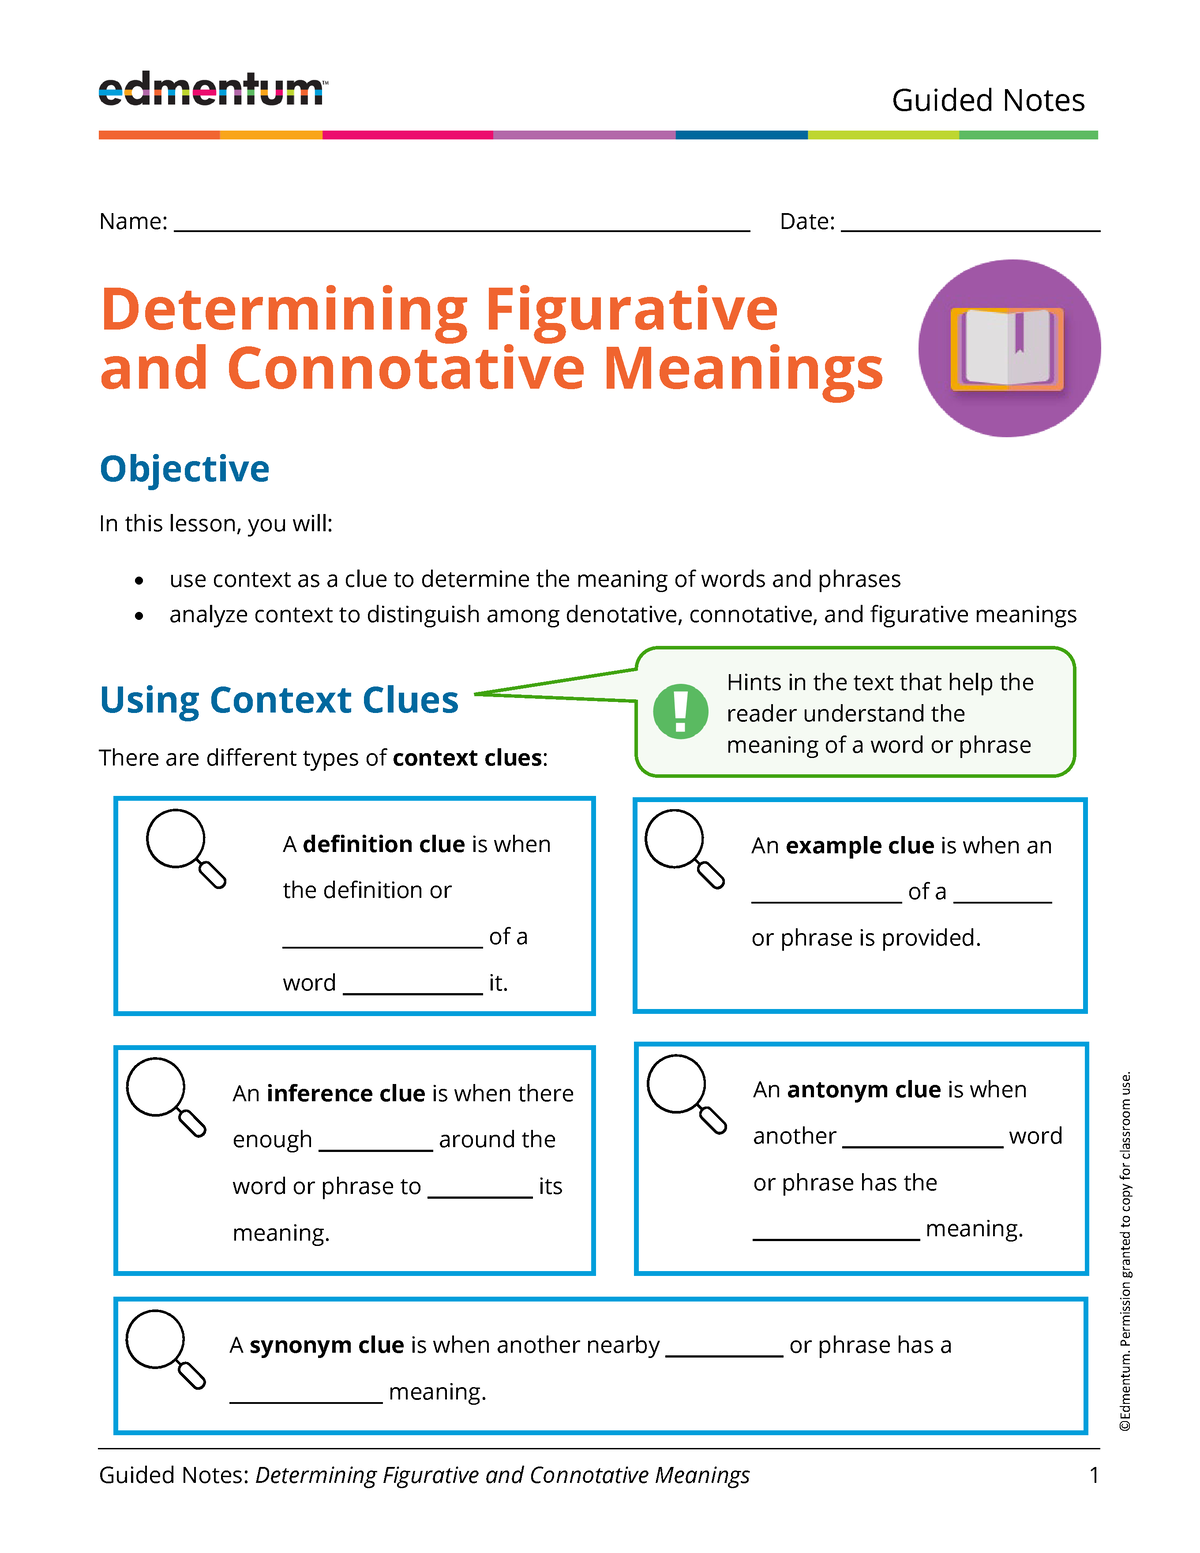 2-guided-notes-determining-figurative-and-connotative-meanings-edmentum-permission